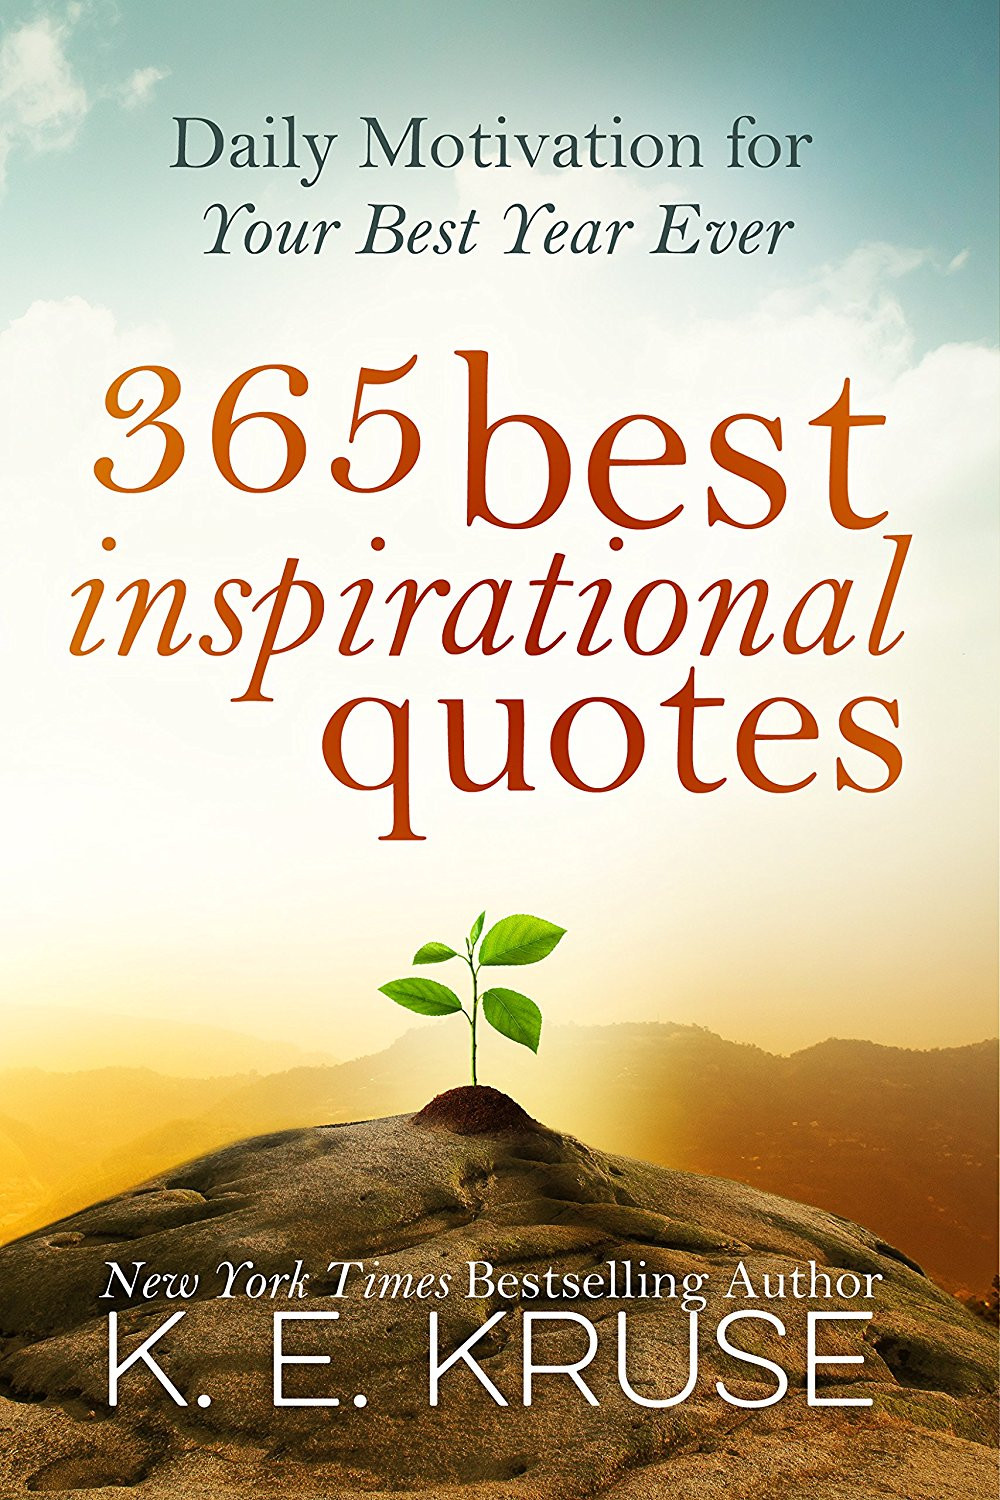 365 Inspirational Quotes
 AMAZON KINDLE BOOK PROMOTION 365 Best Inspirational